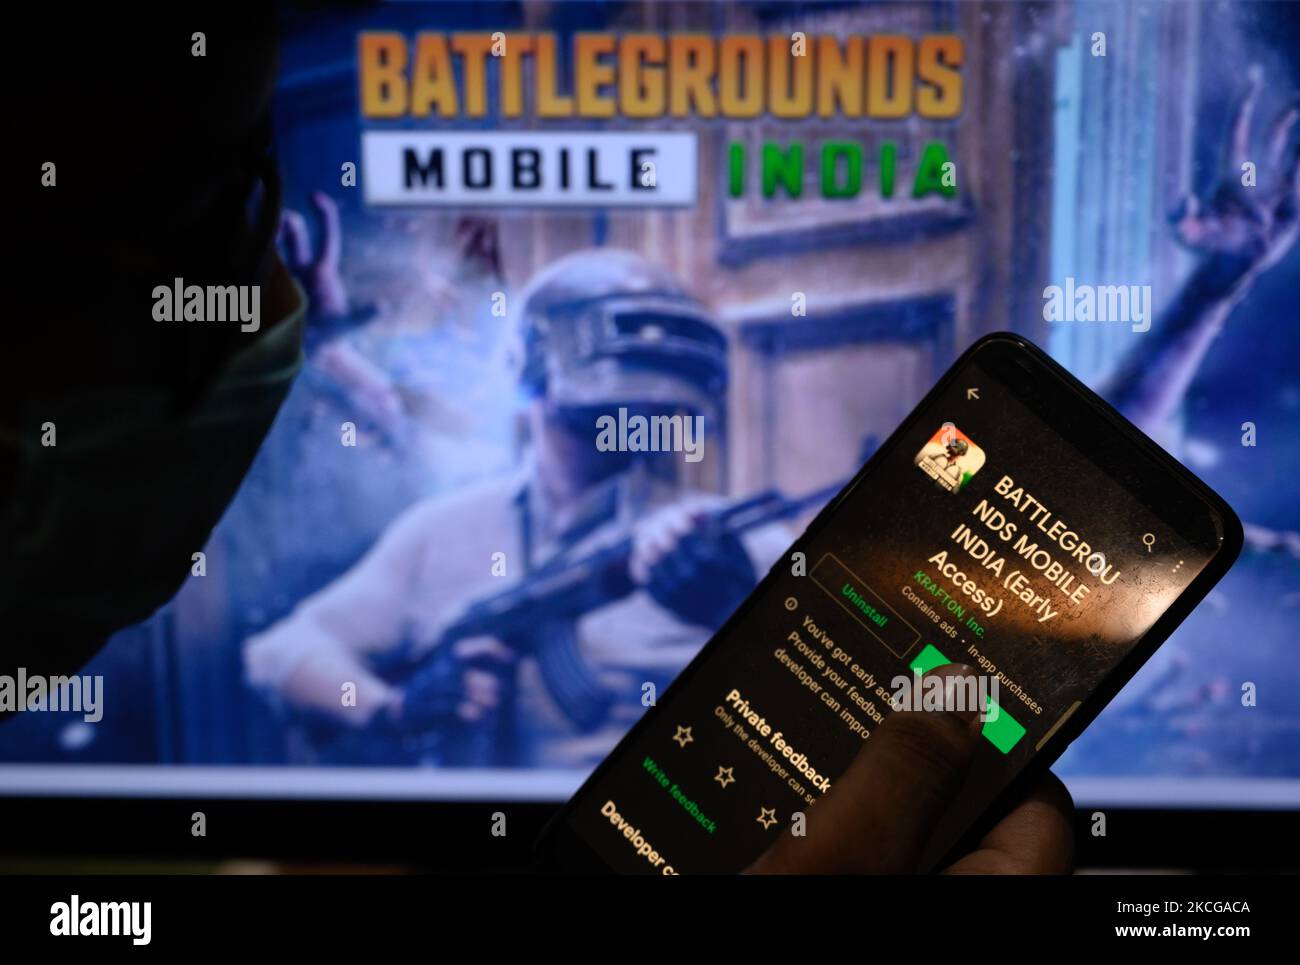 A boy plays with Battlegrounds Mobile India in Tehatta, West Bengal, India on 21 June 2021. Battlegrounds Mobile India, the alternative to PUBG by South Korean video game company Krafton is released for pre-registered beta testers. PUBG Mobile India is banned in India. The Confederation of All India Traders (CAIT) has spoken out against the relaunch of PUBG Mobile as Battlegrounds Mobile India. A new call has now been made for its ban from Google Play. The game has faced a backlash from the Indian government due to Krafton's link to Chinese servers Tencent and the security hazard apprehension. Stock Photo